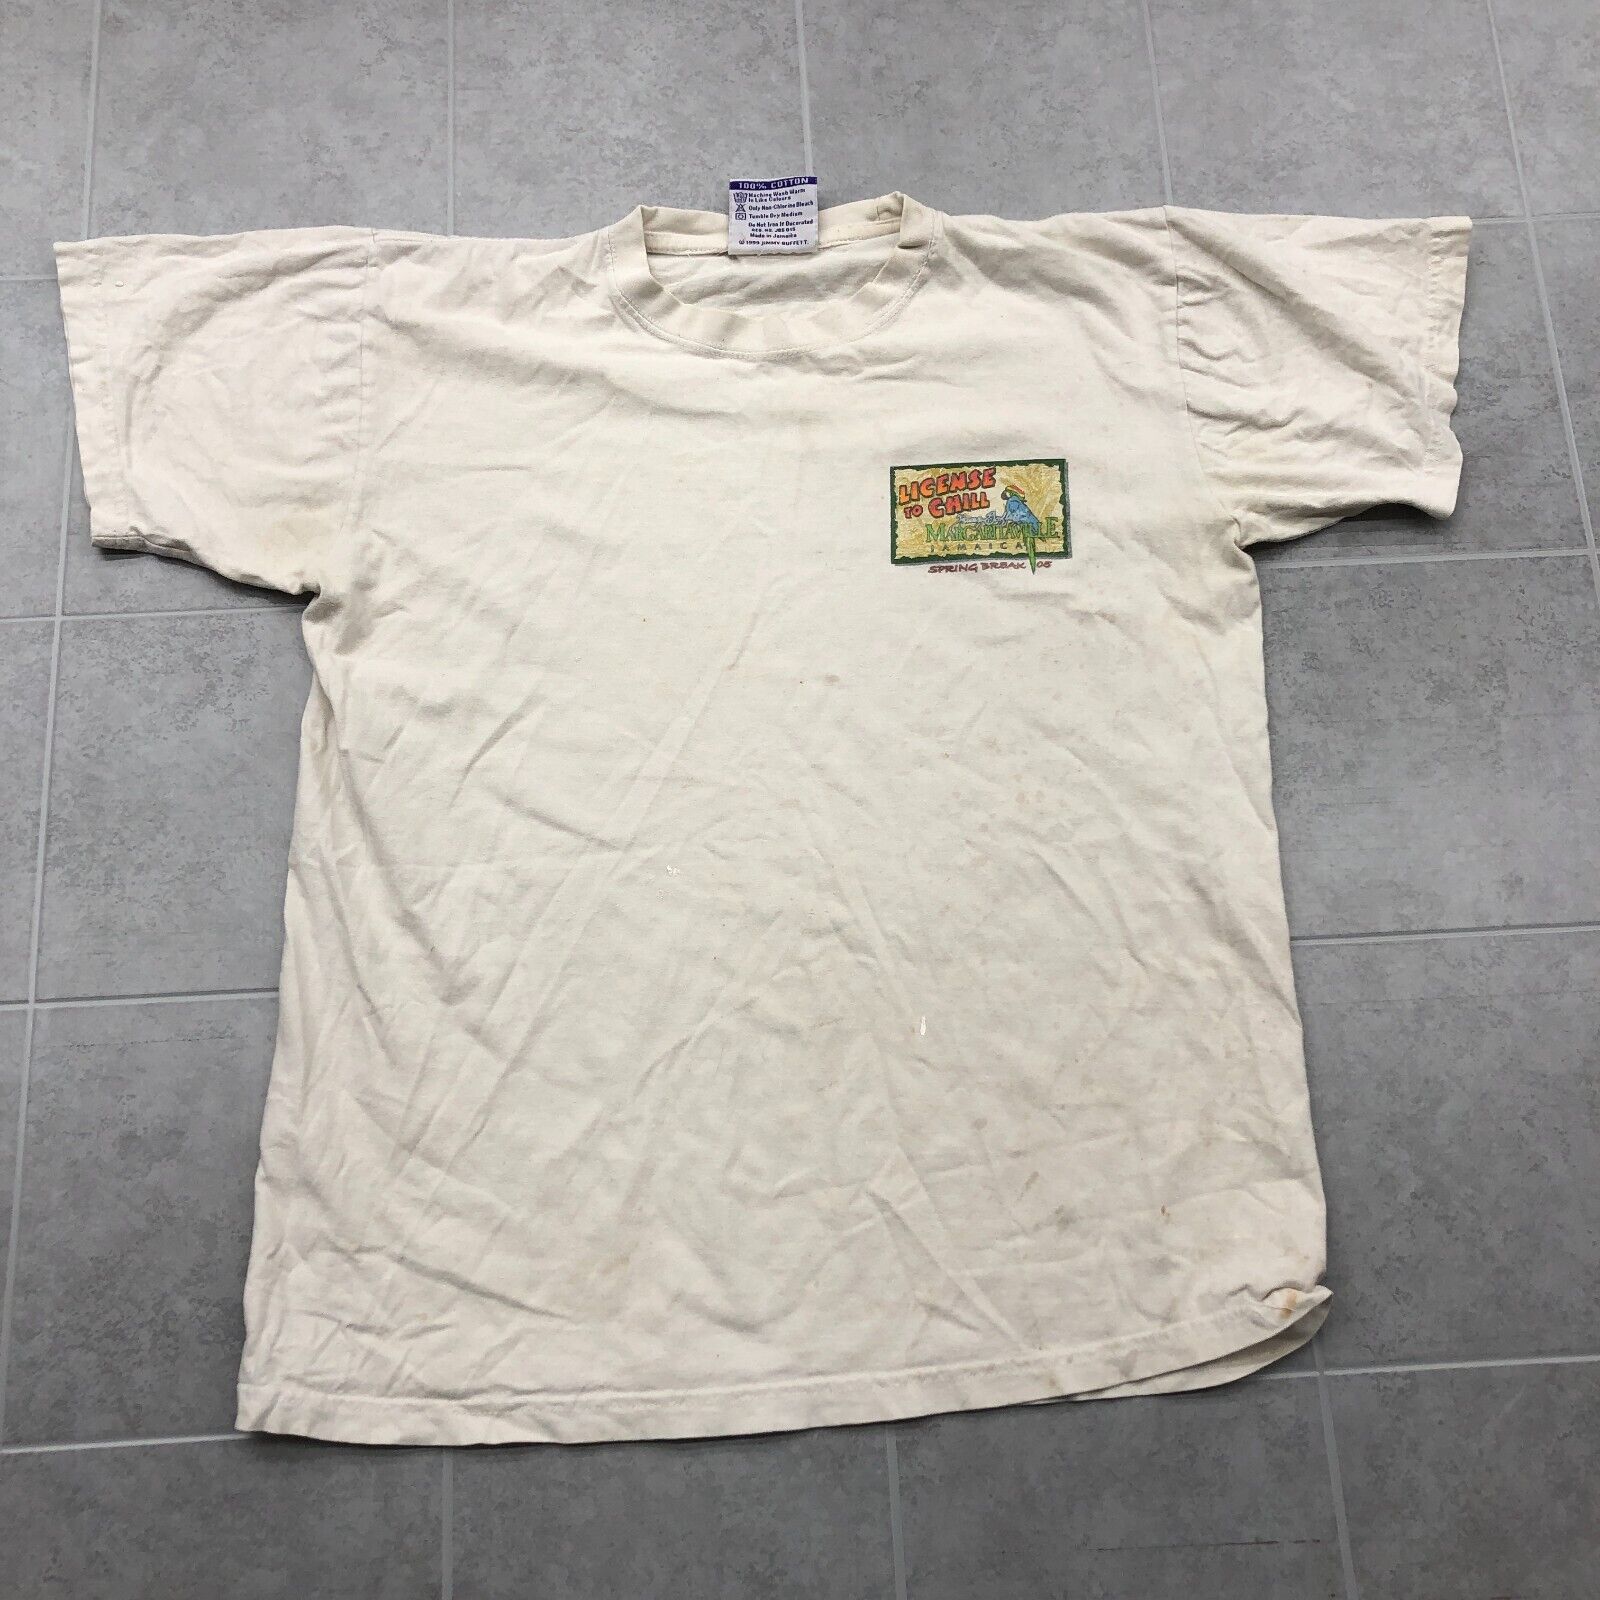 '05 Margaritaville White License To Chill Jamaica Crew Neck T-Shirt Adult Size S